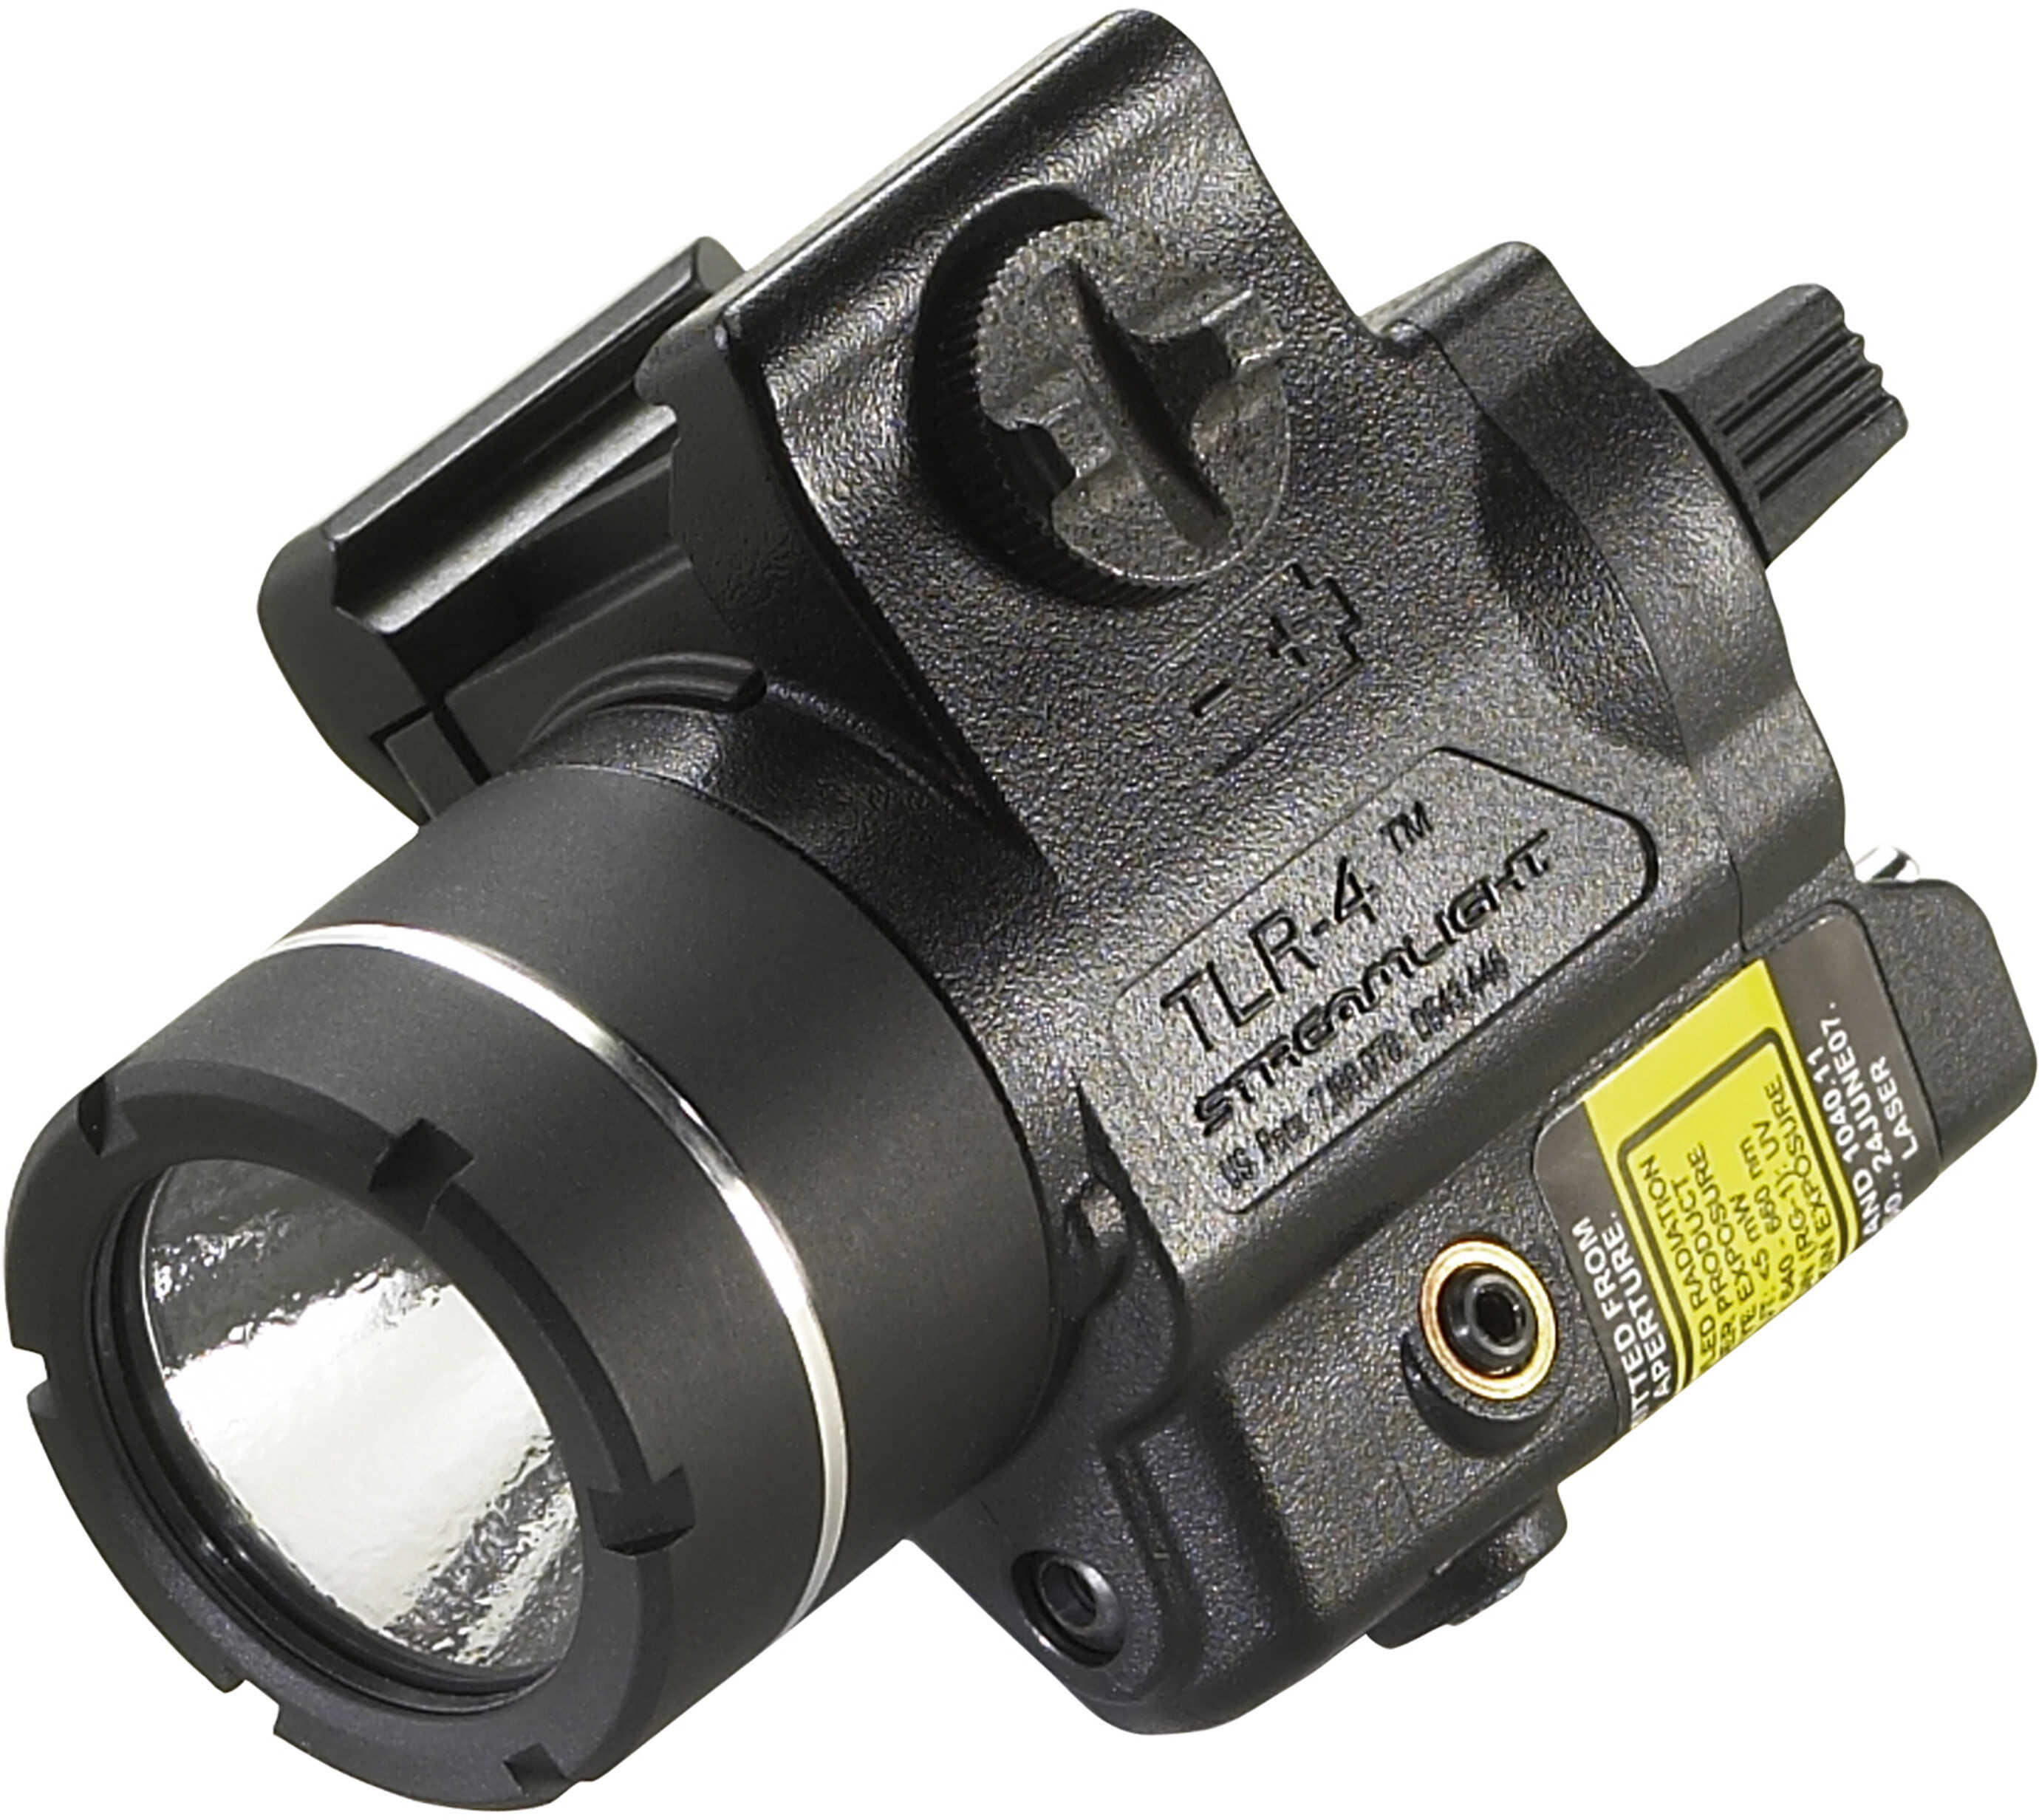 StreamLight TLR-4 Compact Rail Mounted Tactical Light With Integrated Red Aiming Laser